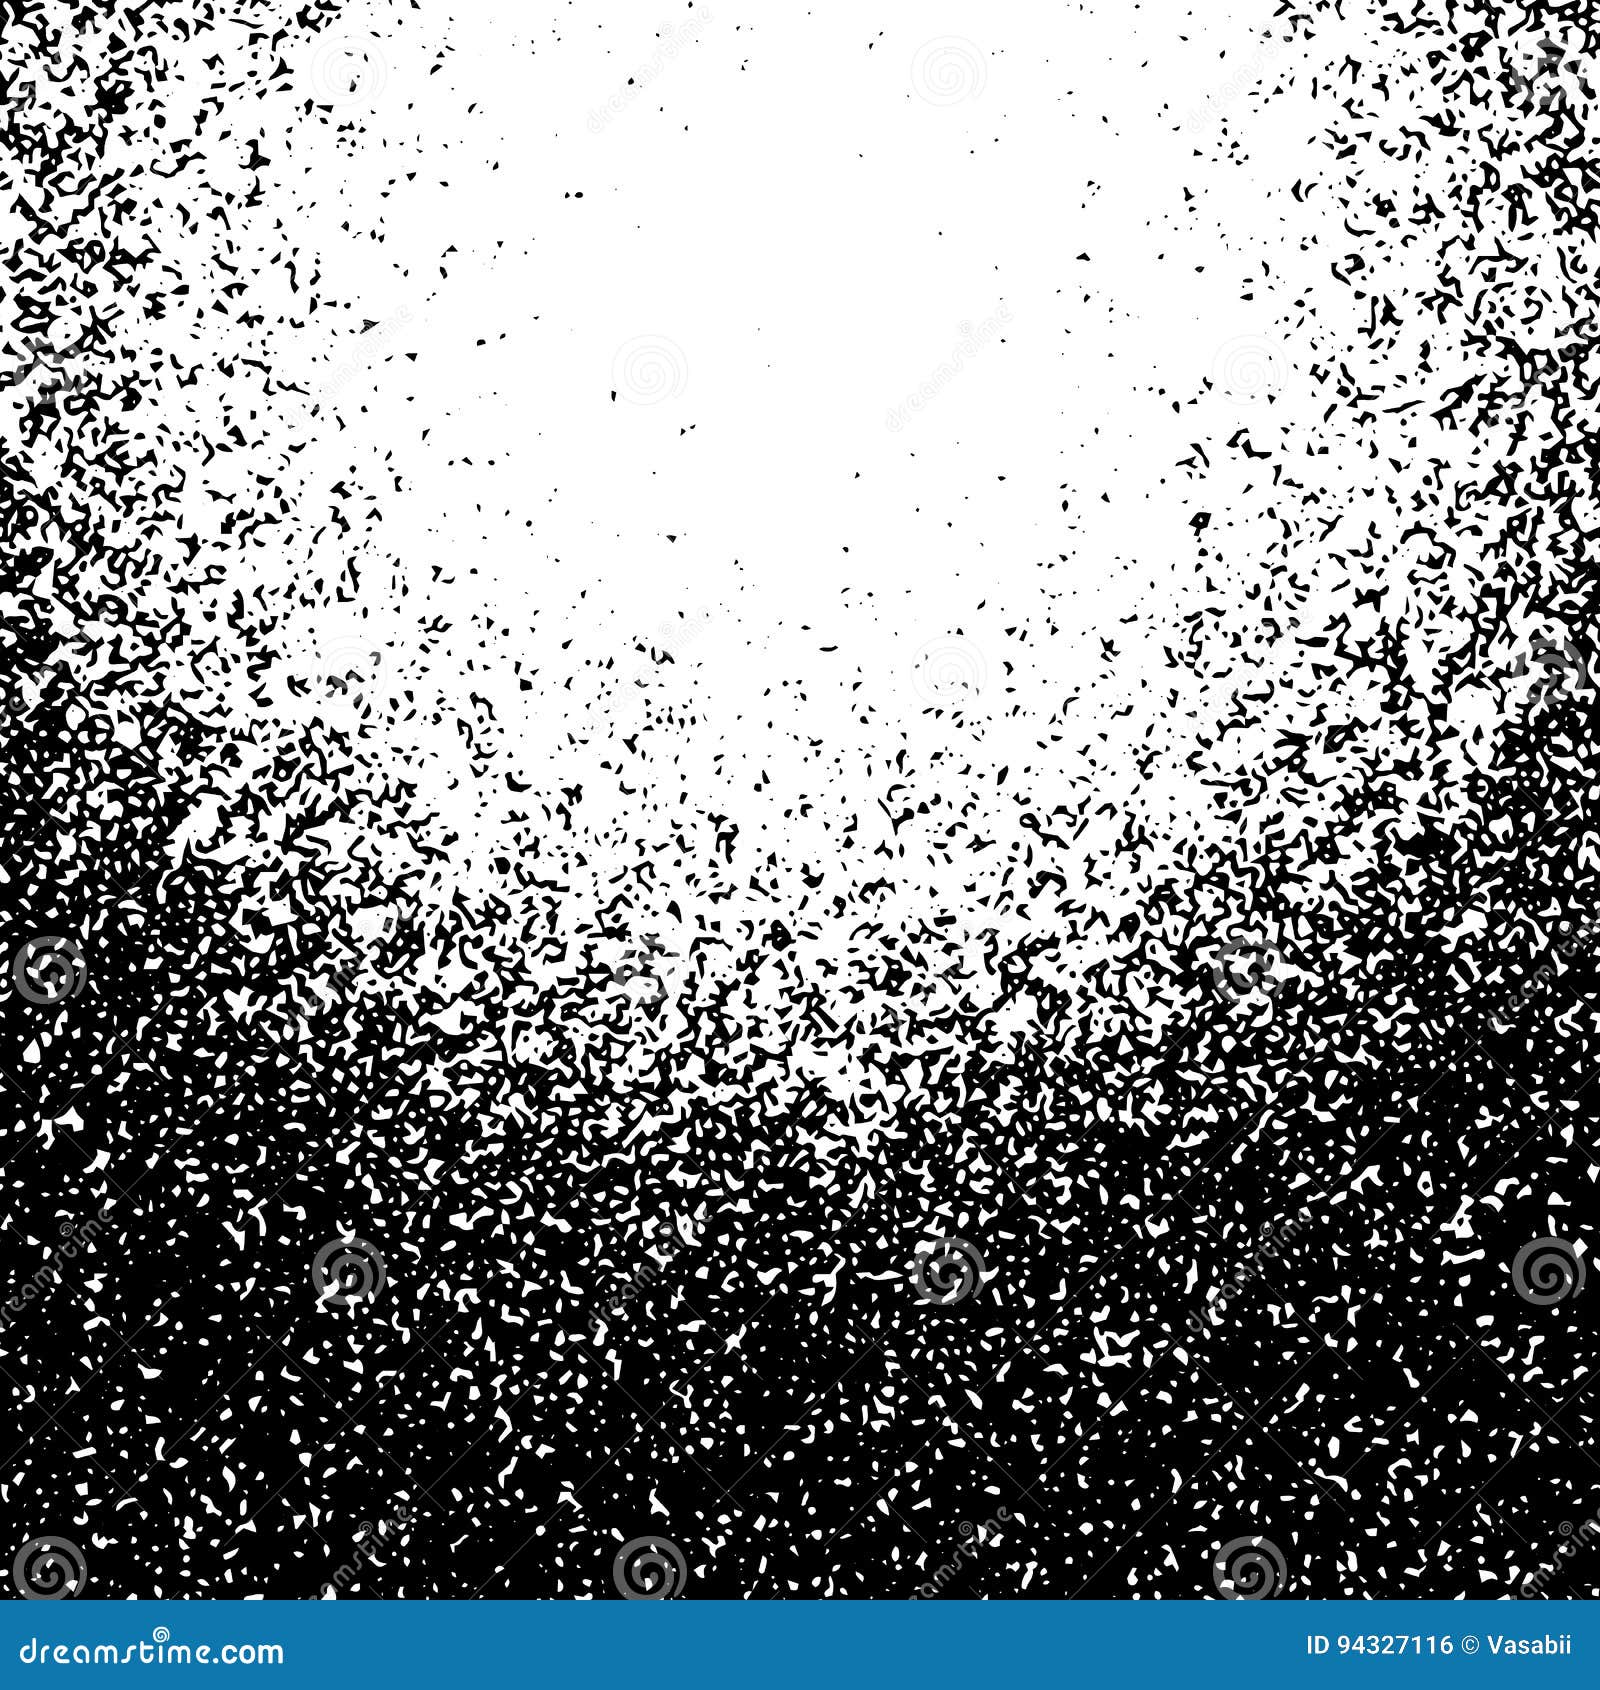 Noise Vector Texture Background Stock Vector - Illustration of effect ...